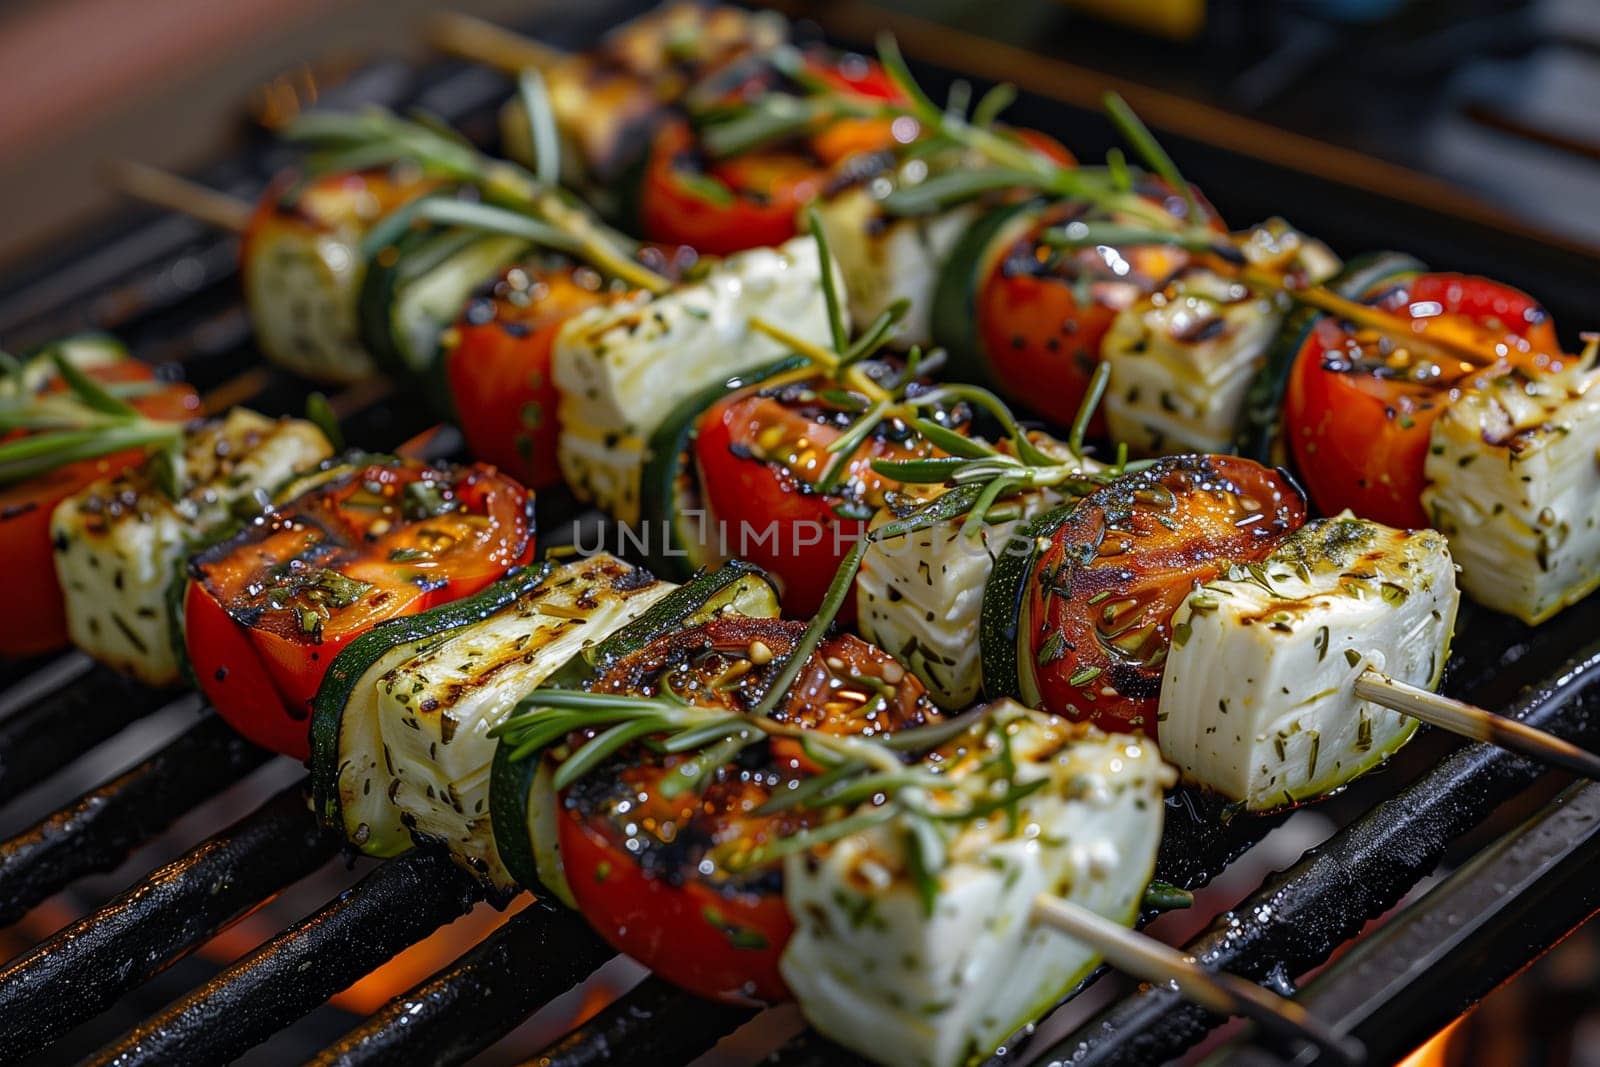 Grilled vegetarian grill skewers, tomato, sheep cheese and zucchini slices, rosemary garlic oil. by Sd28DimoN_1976